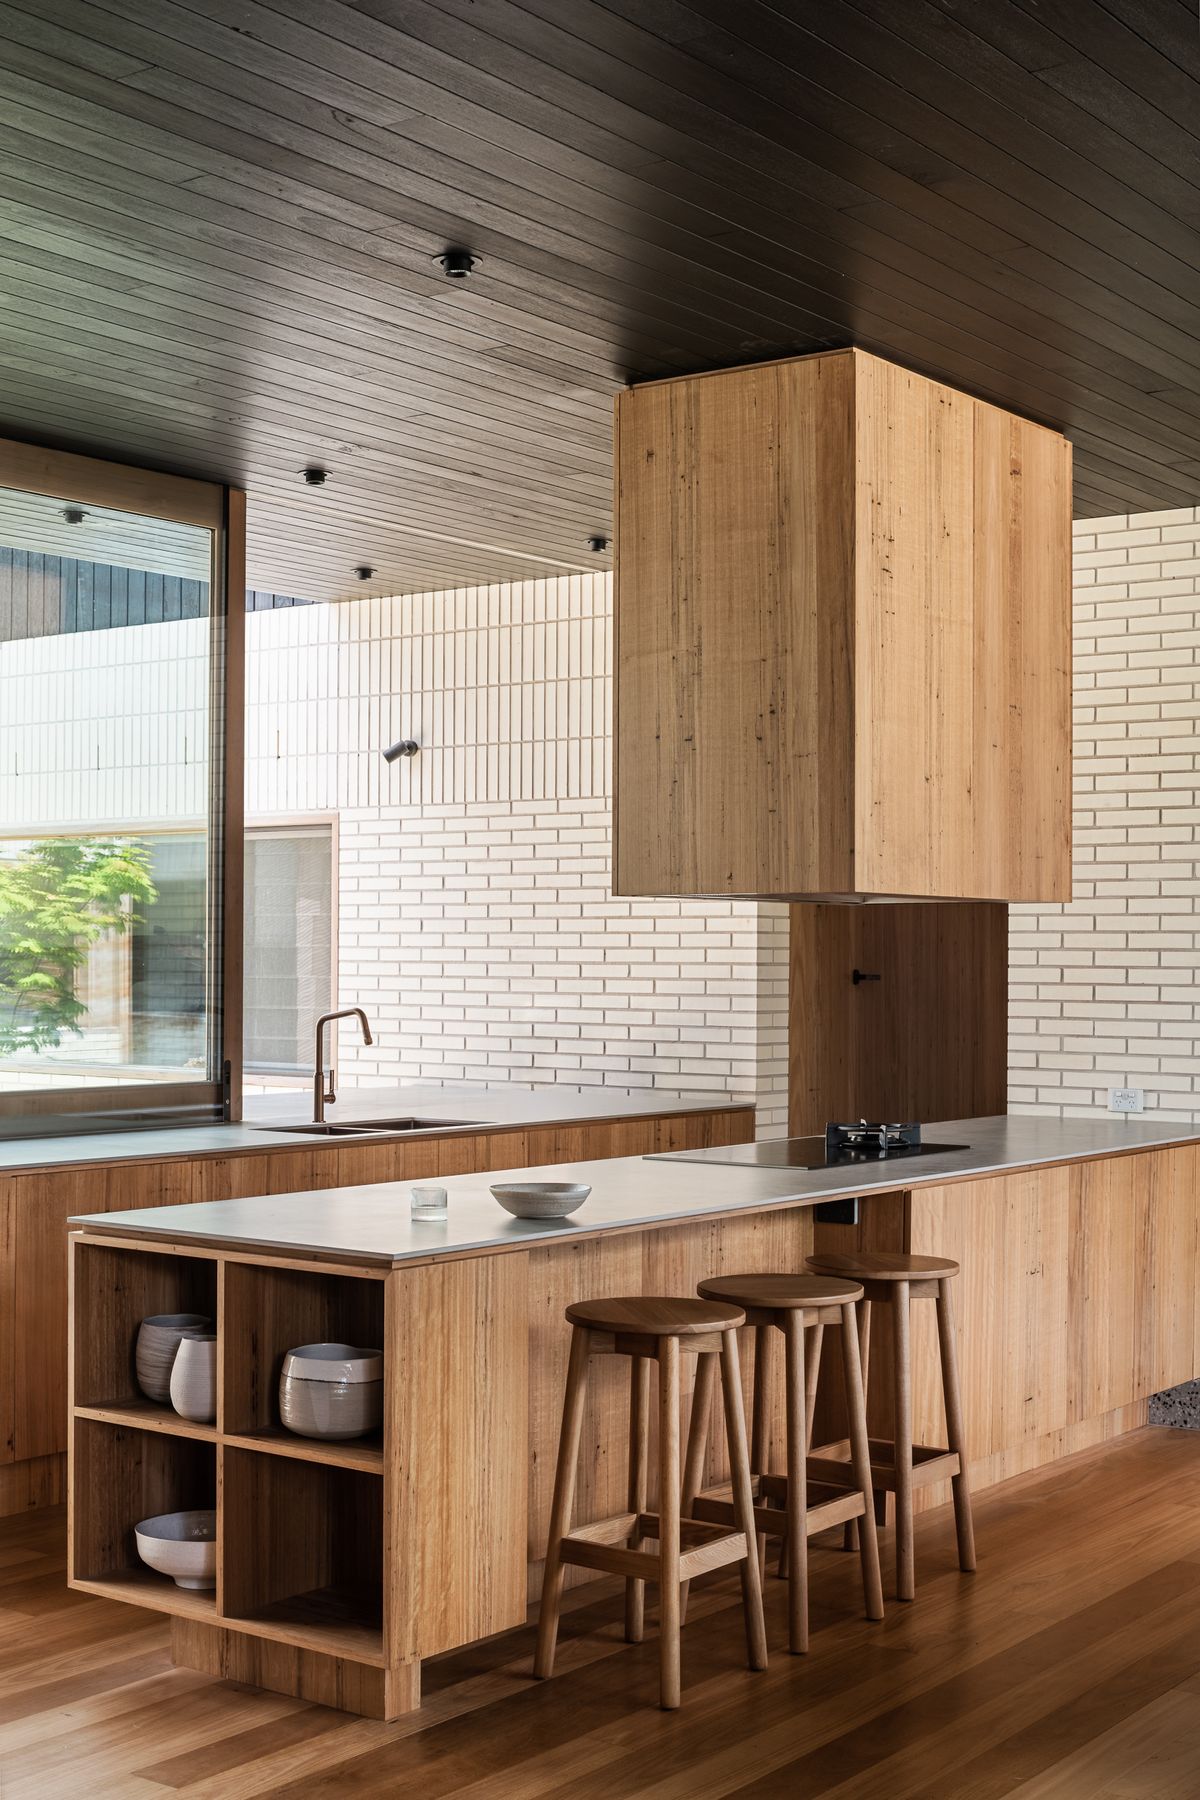 A timber veneer kitchen island with a slim benchtop and space for timber stools